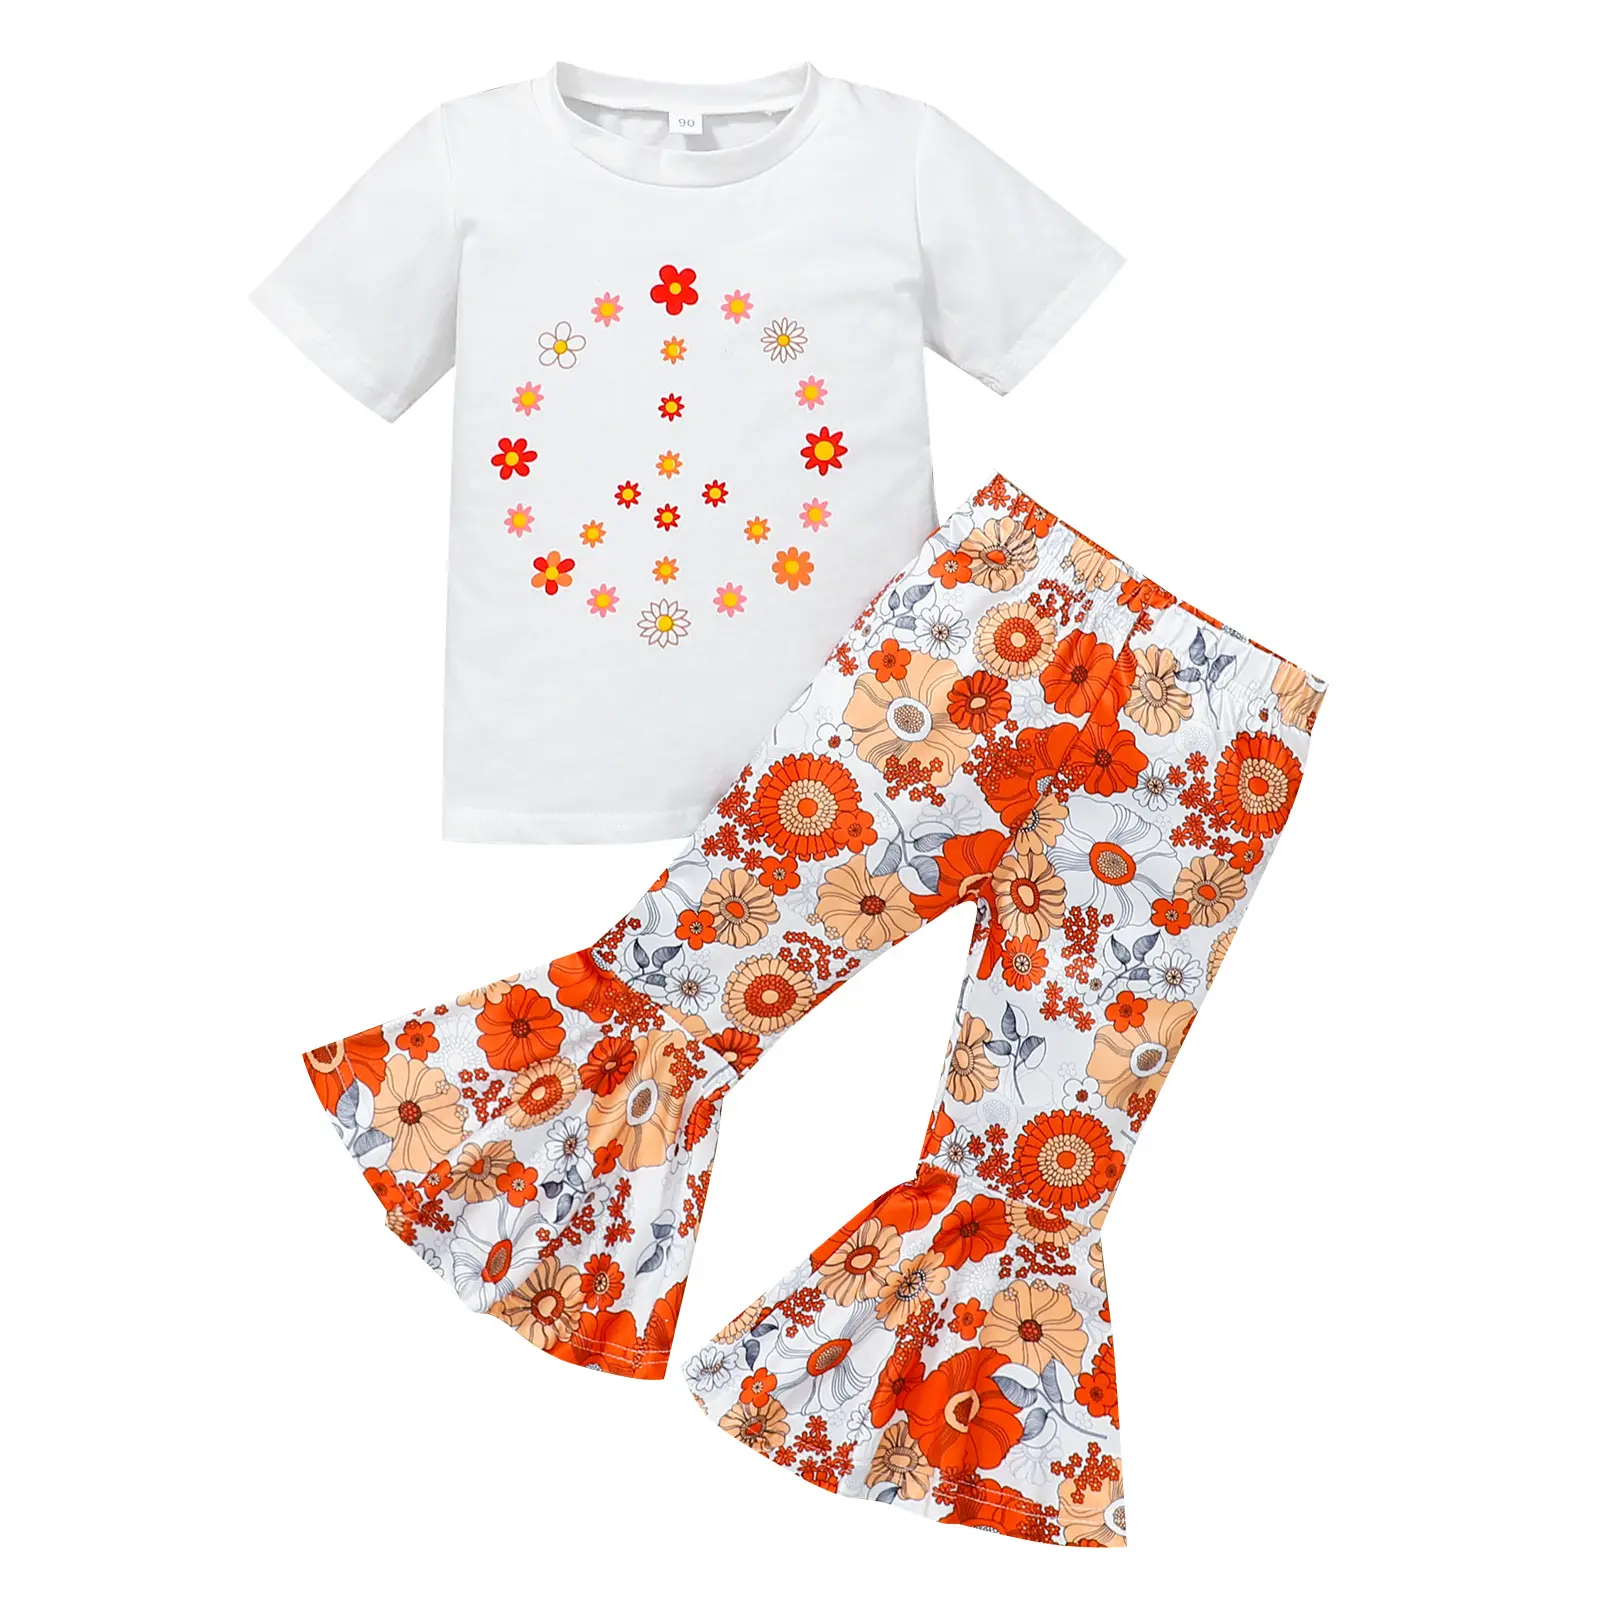 2023 New Style Summer Baby Clothes Short Sleeve T Shirt and Print Pants Kids Girl Clothes Set Girls Clothing Flare Pants Set